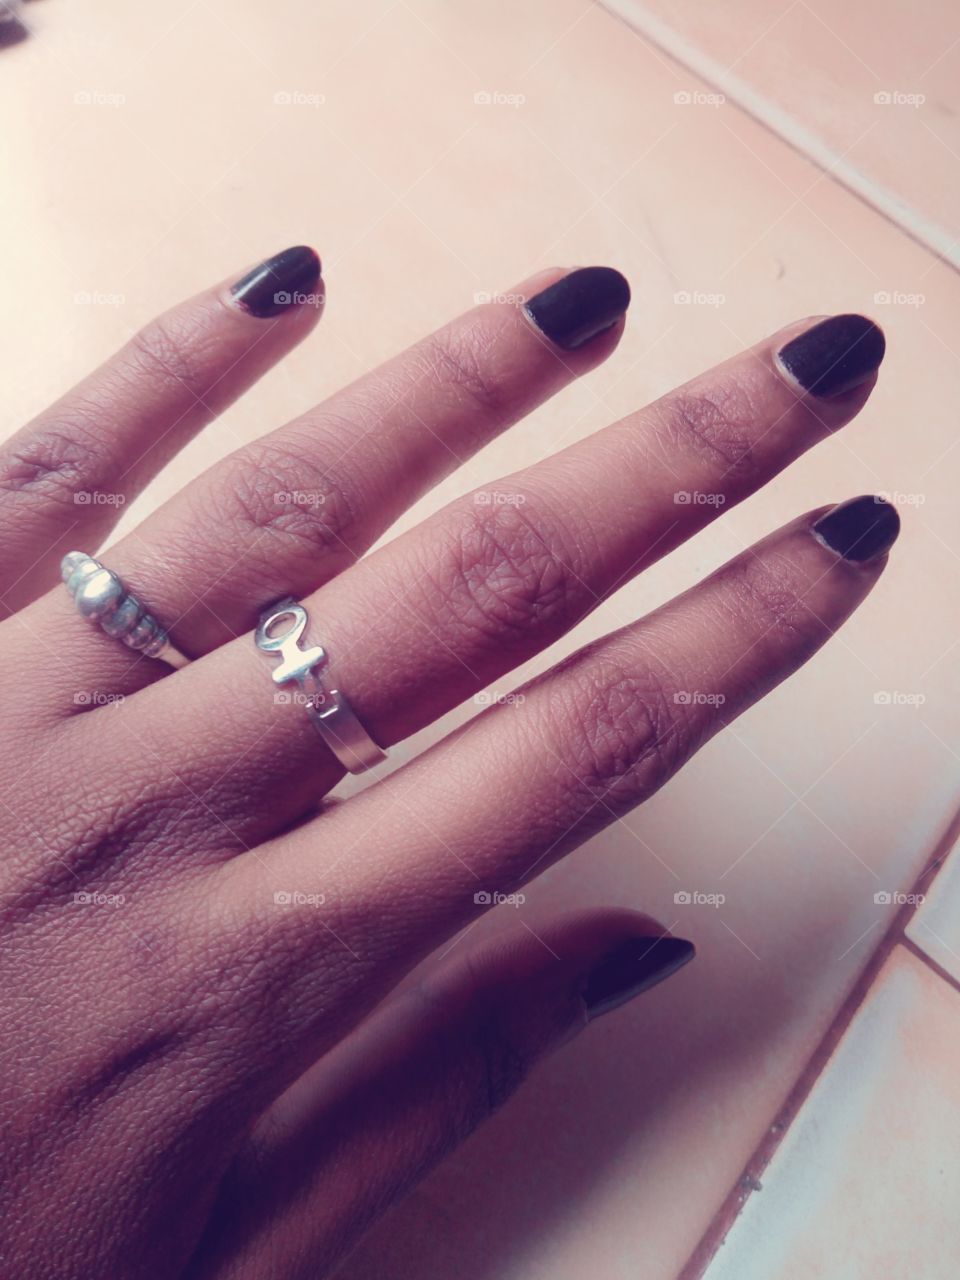 black nails with rings